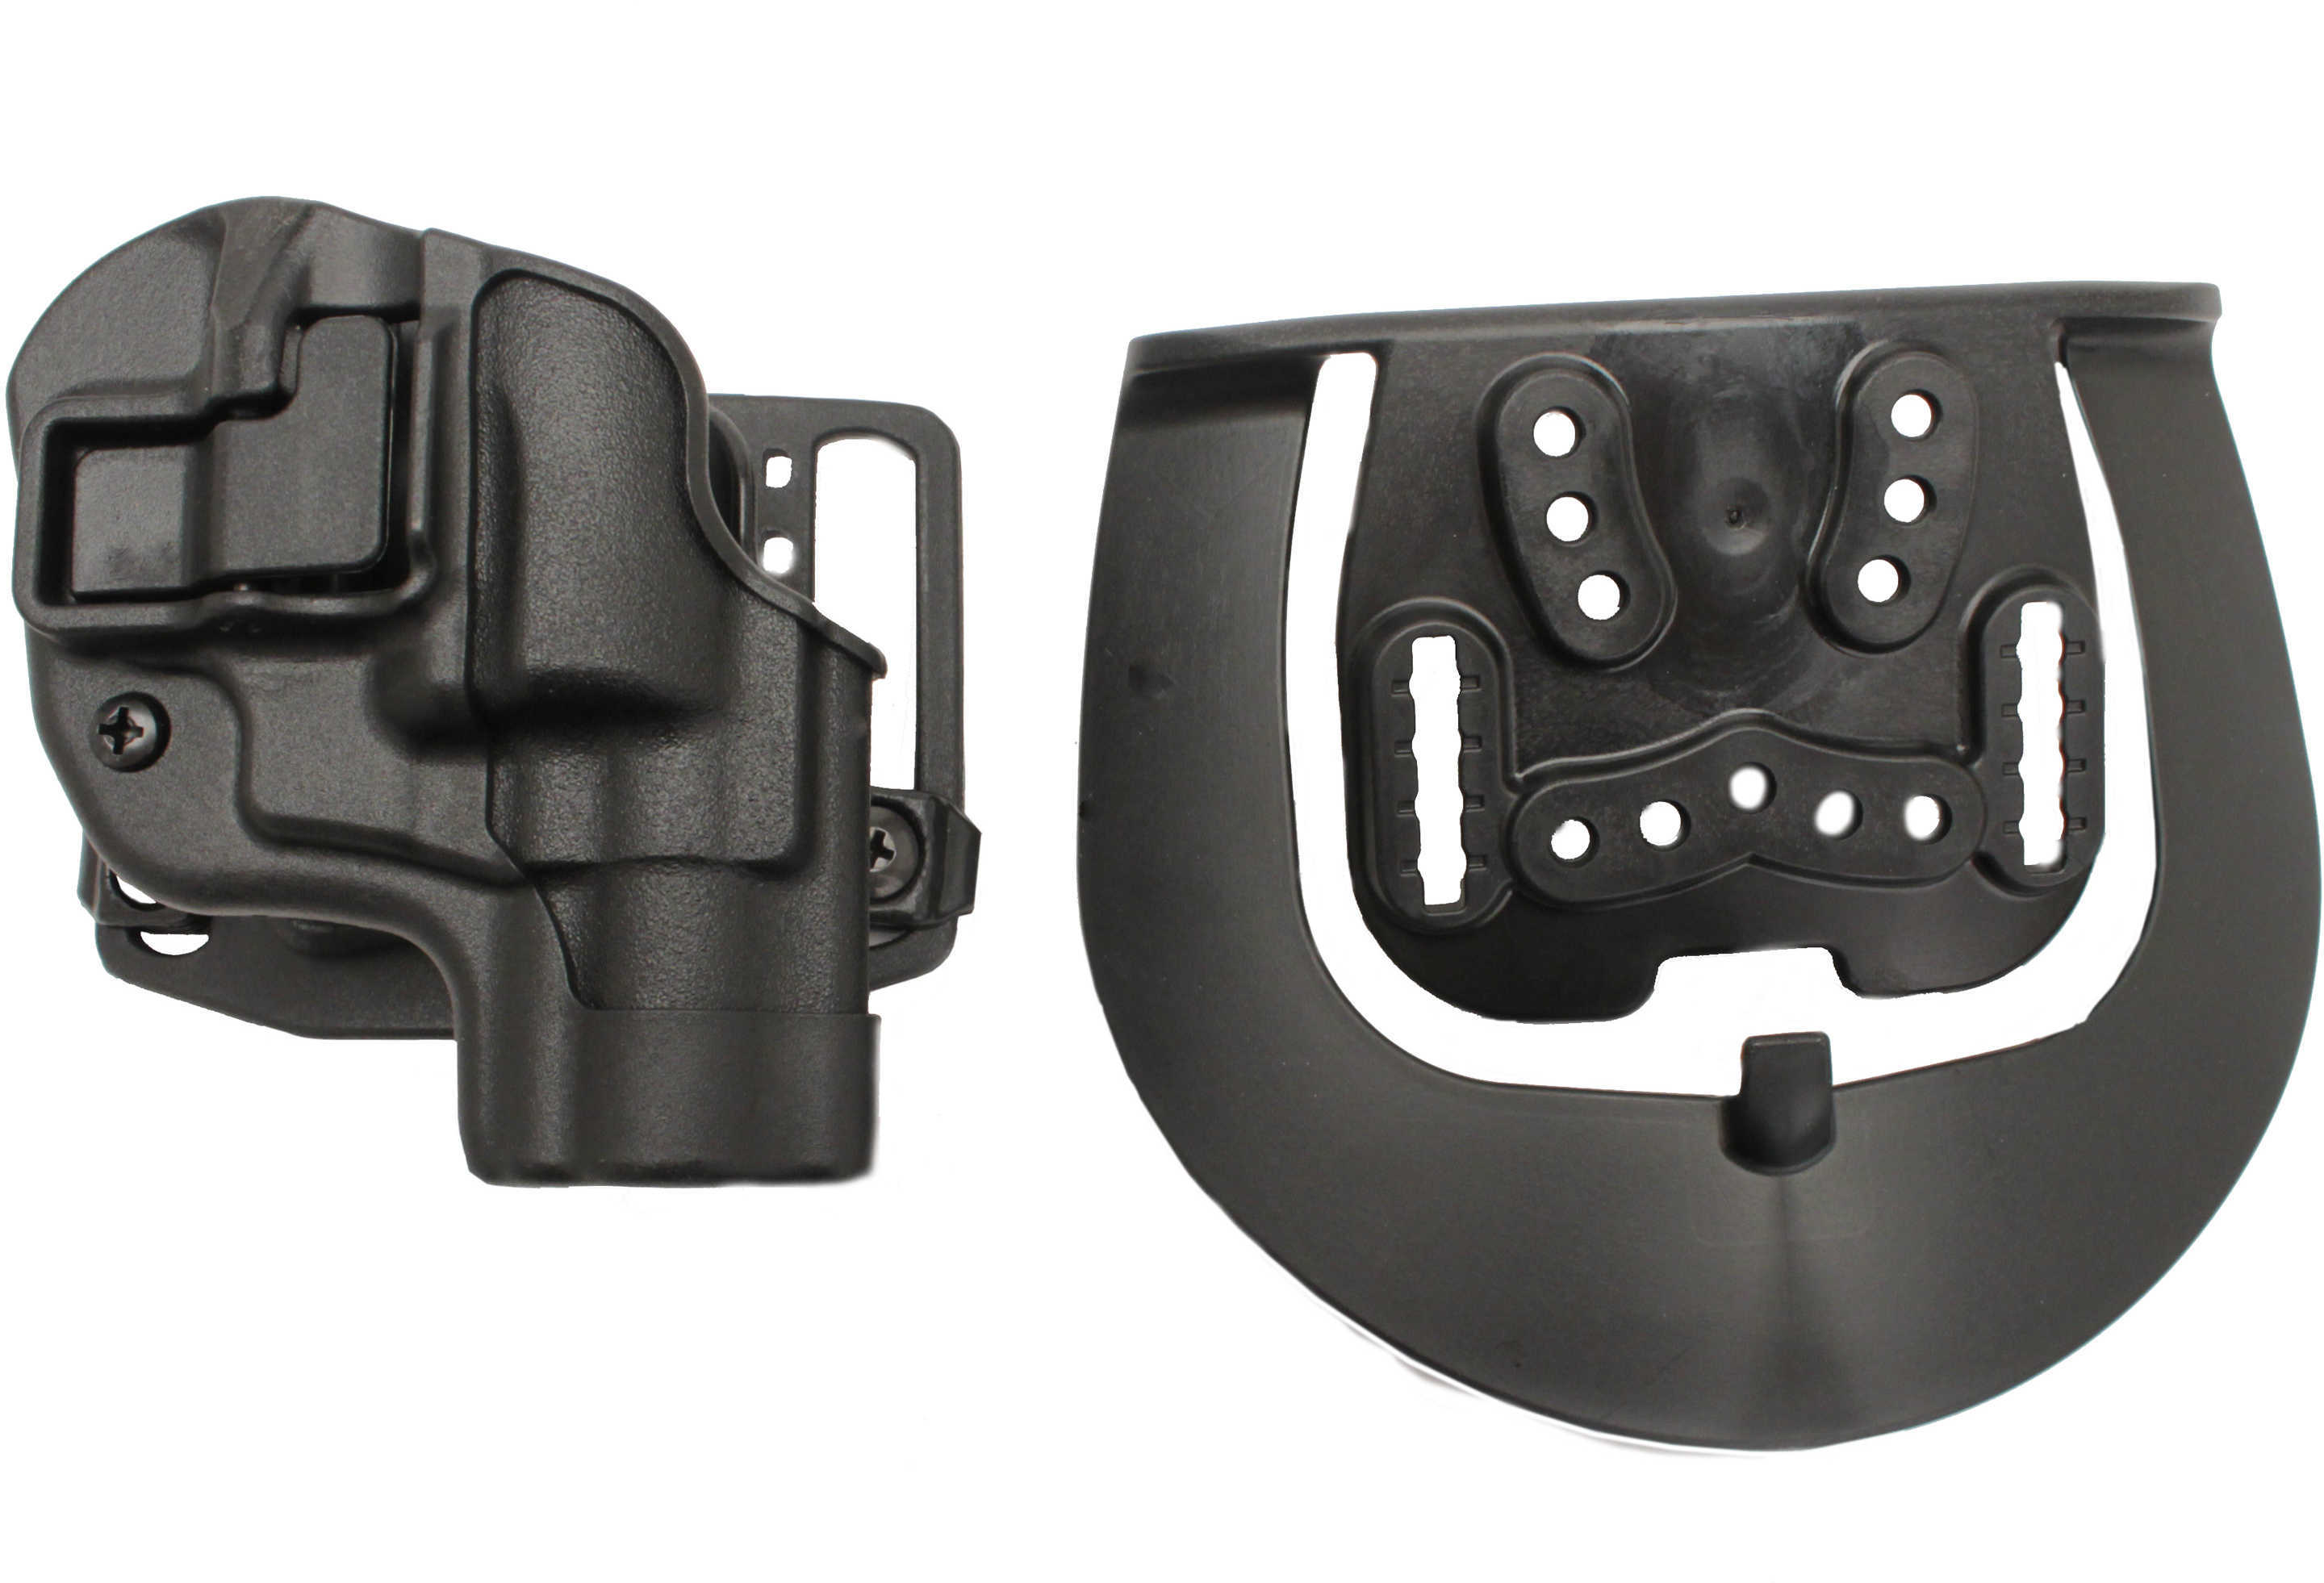 BLACKHAWK! CQC SERPA Holster With Belt and Paddle Attachment Fits J Frame 2" Barrel Right Hand 410520BK-R